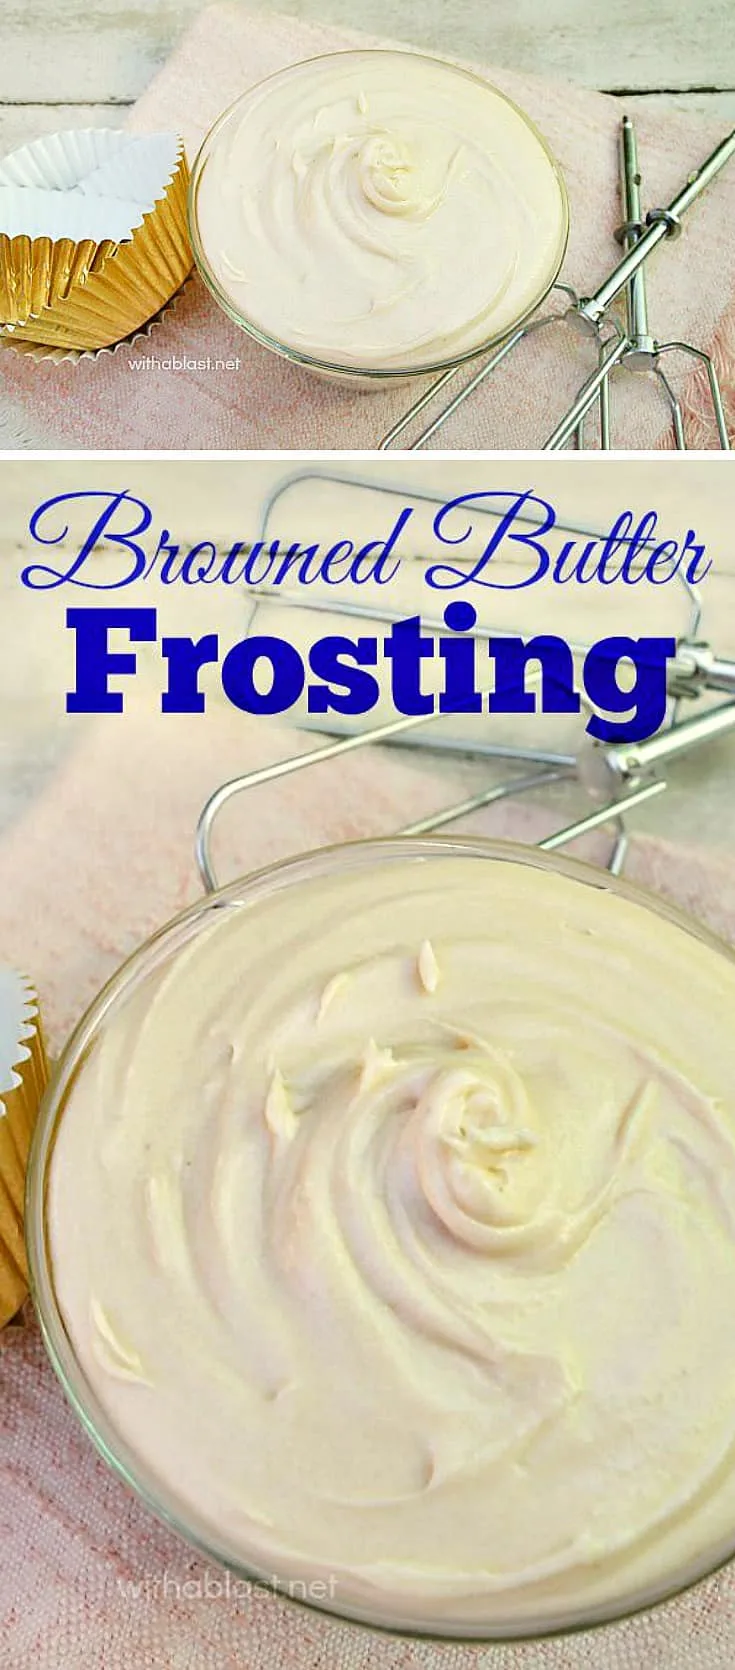 How to make the most delicious Browned Butter Frosting ! If you have never tasted (or made this) now is the time to start - a must have recipe, especially for Fall desserts #Frosting #FrostngRecipe #FallFrosting #BrownedButterFrosting #IcingRecipe #FallIcingRecipe